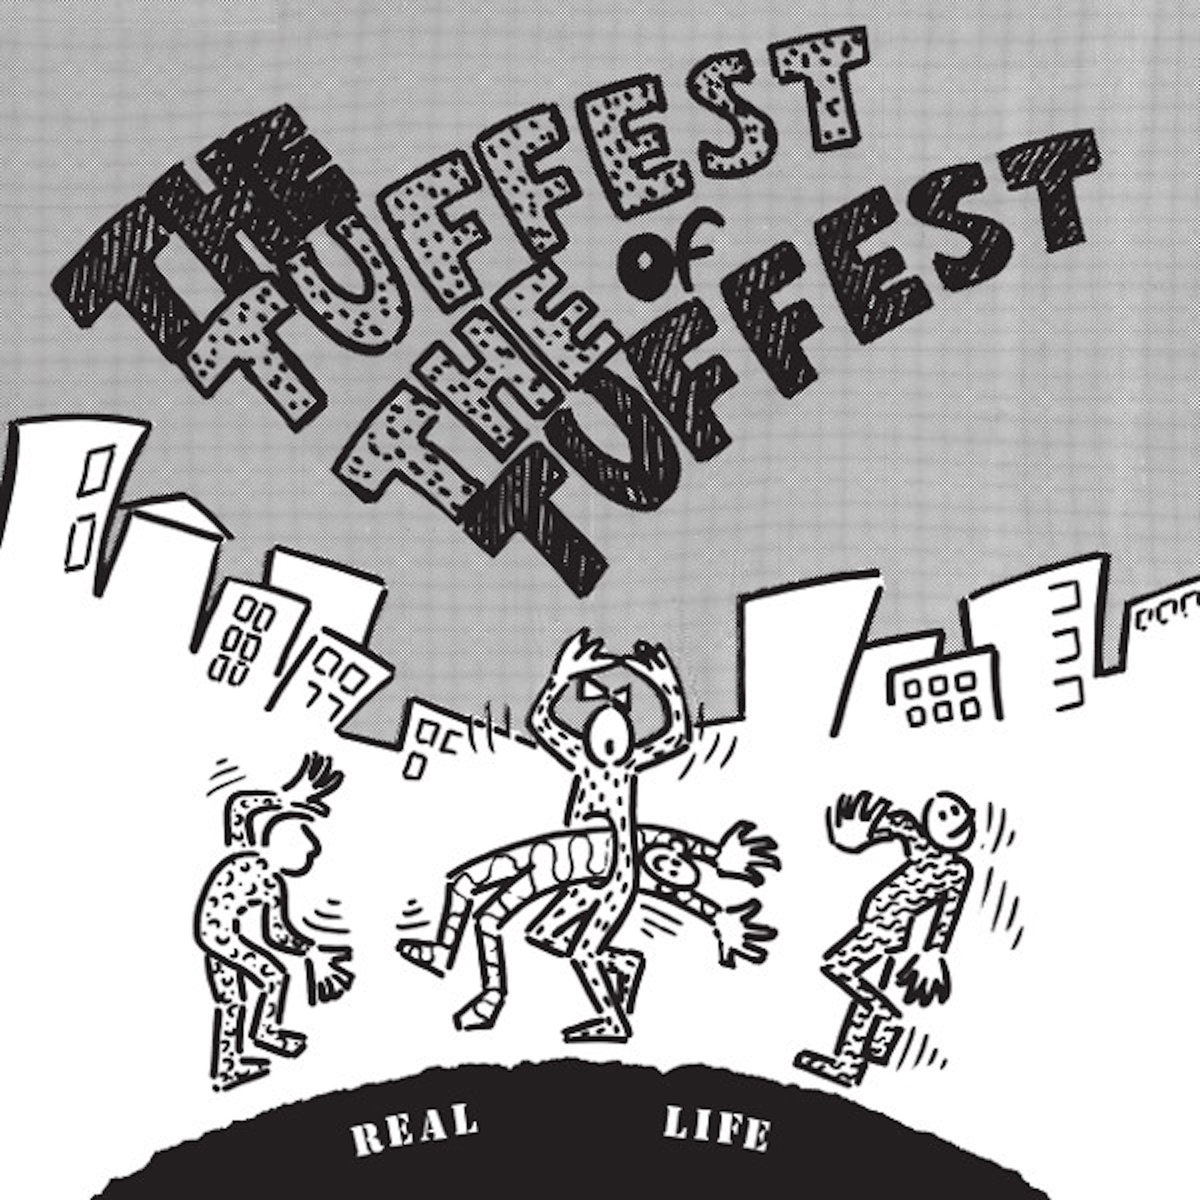 Album of the week: Various Artists – The Tuffest of the Tuffest